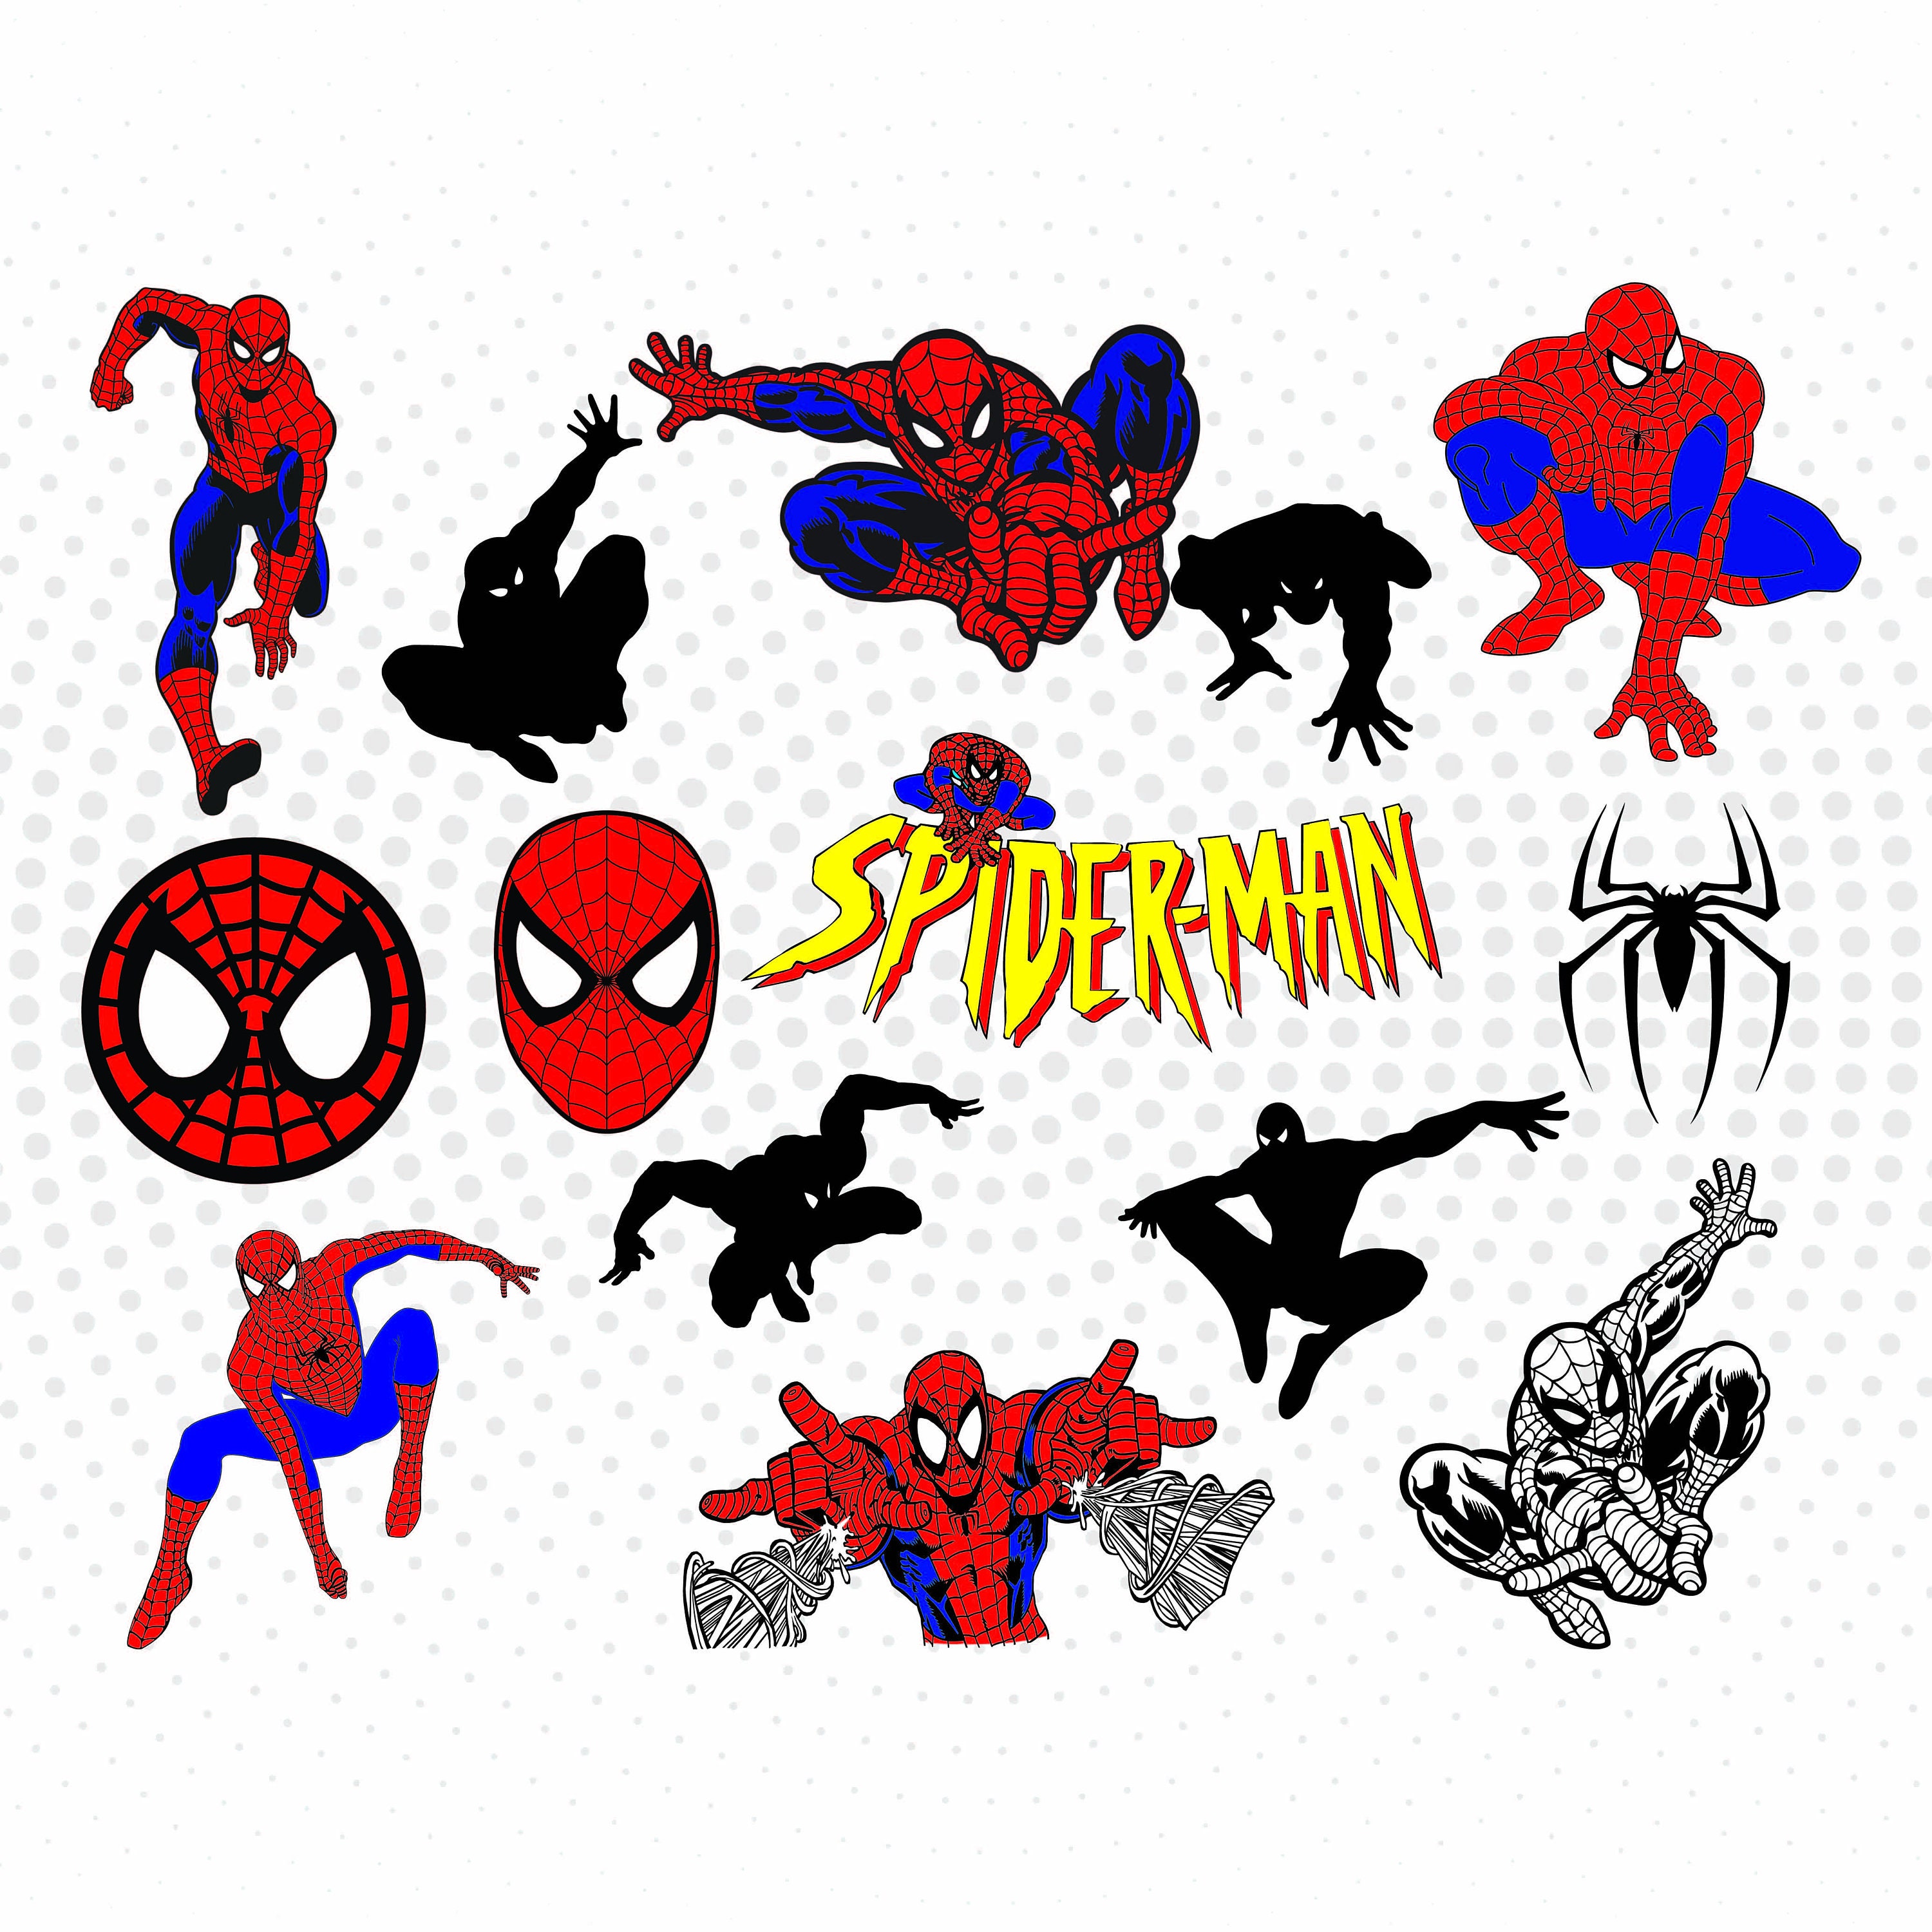 17 Spiderman Free Svg Cut Files Download Free Svg Cut Files And Images